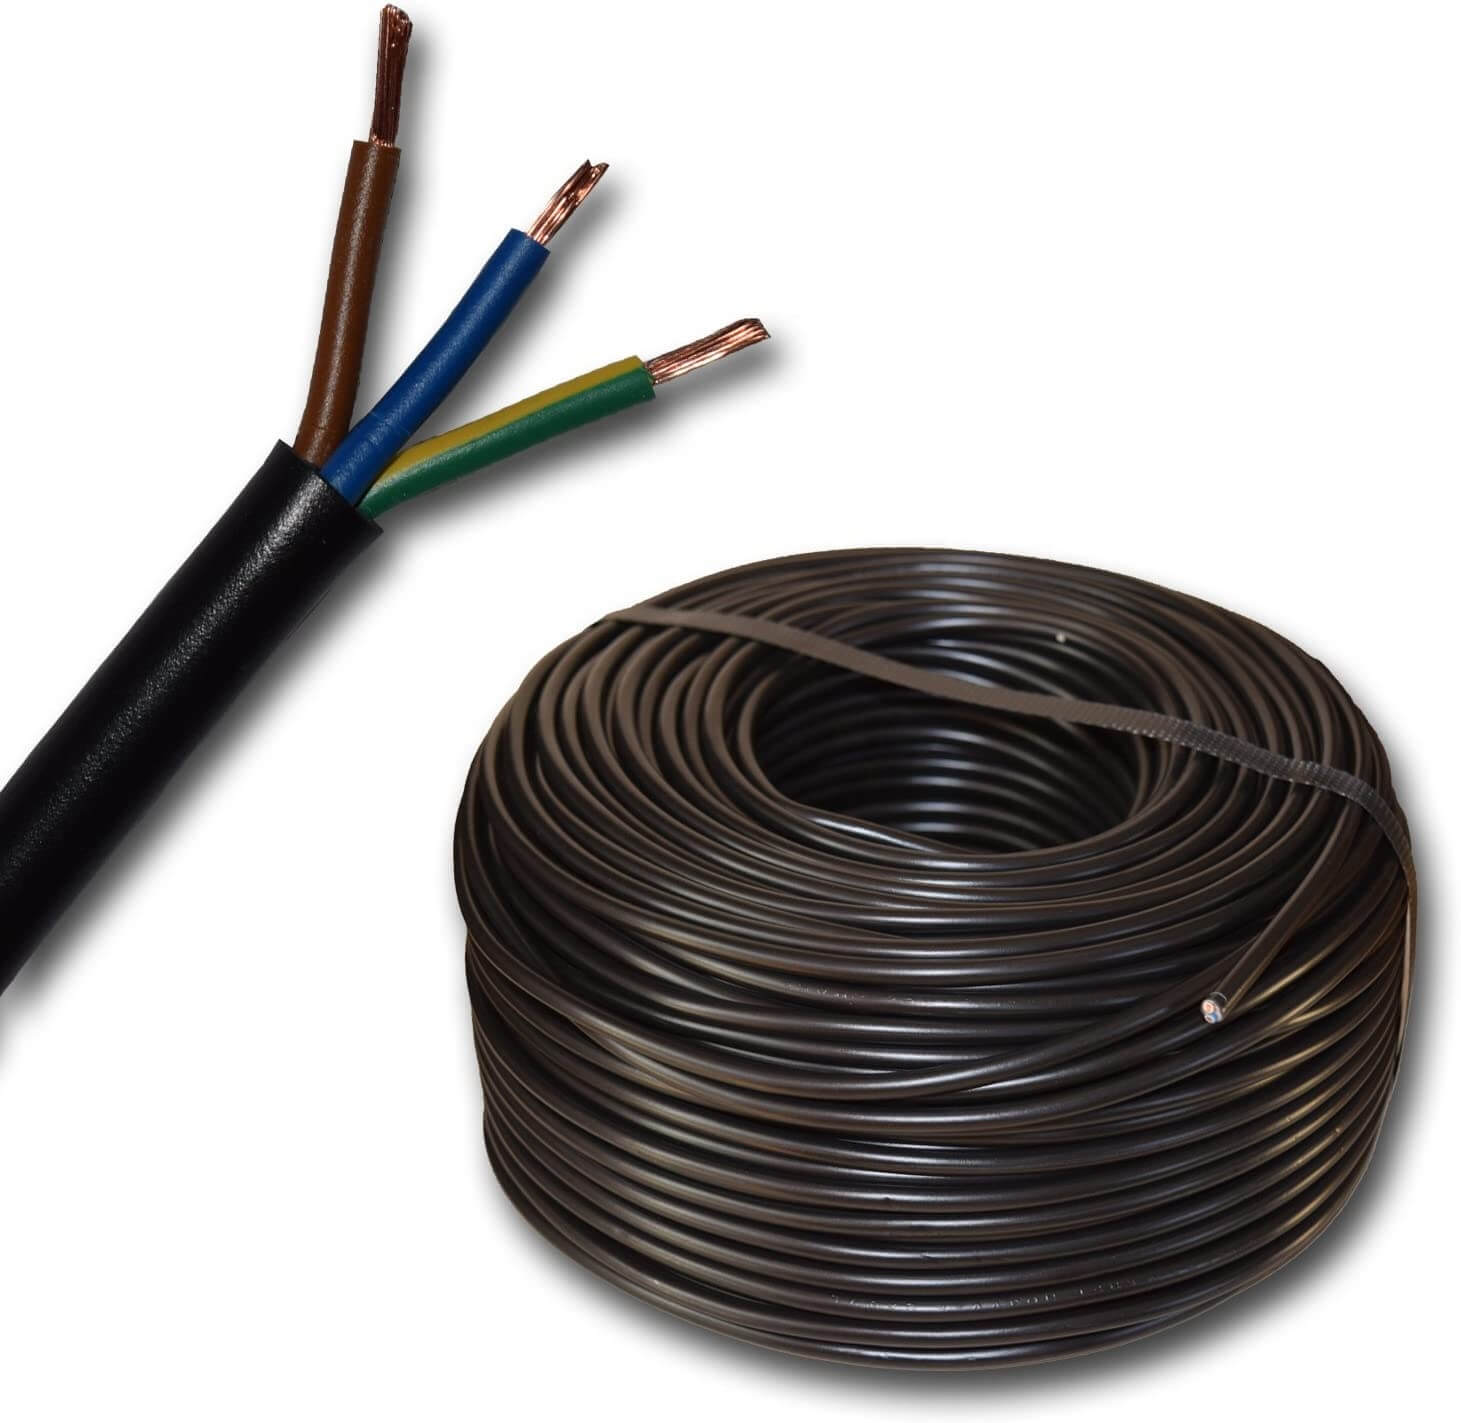 China 300/500V 3cx2.5mm Flexible Wire Cable 3 Core 2.5mm PVC Insulated PVC Sheathed Multi-core Flexible Cable